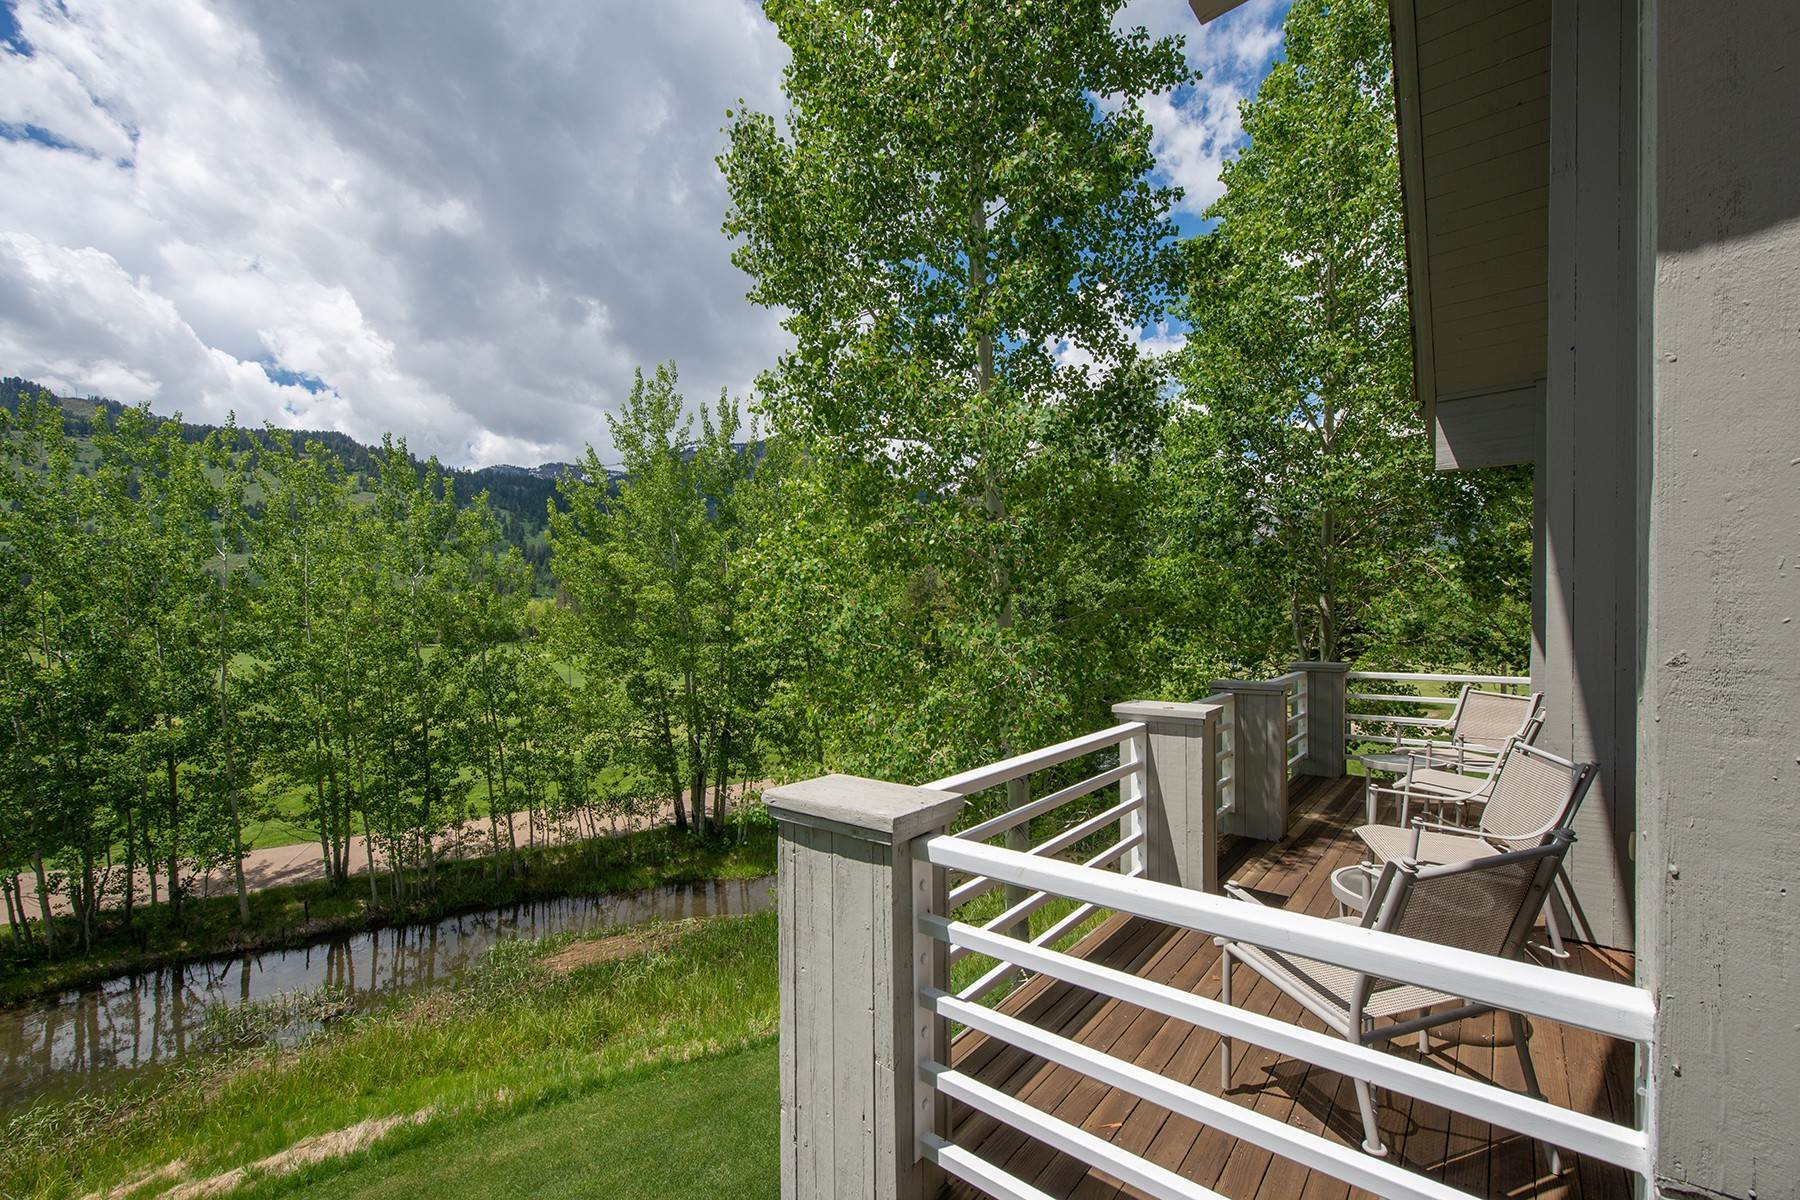 24. Fractional Ownership Property for Sale at Teton Pines Residence Club 3466 N Clubhouse Drive Wilson, Wyoming 83014 United States